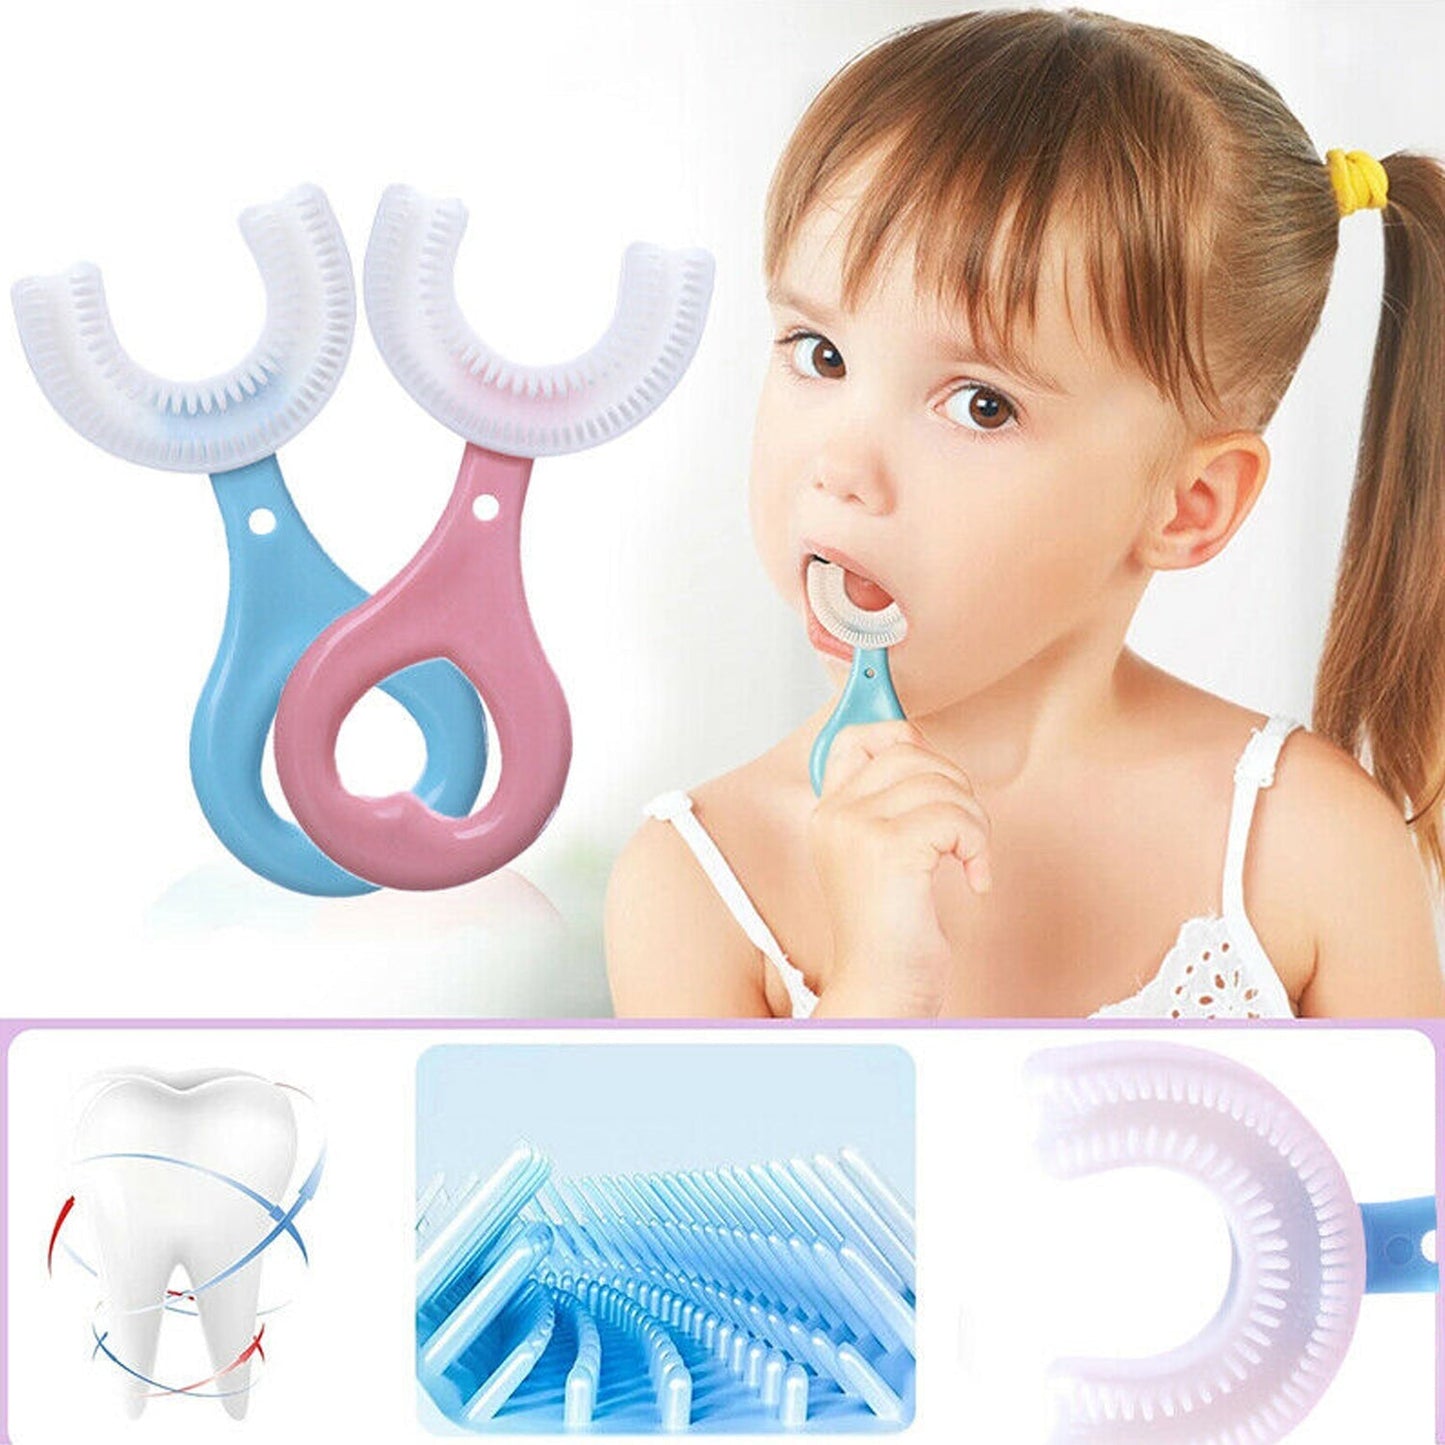 4774 Kids U S Tooth Brush used in all kinds of household bathroom places for washing teeth of kids, toddlers and children’s easily and comfortably. DeoDap